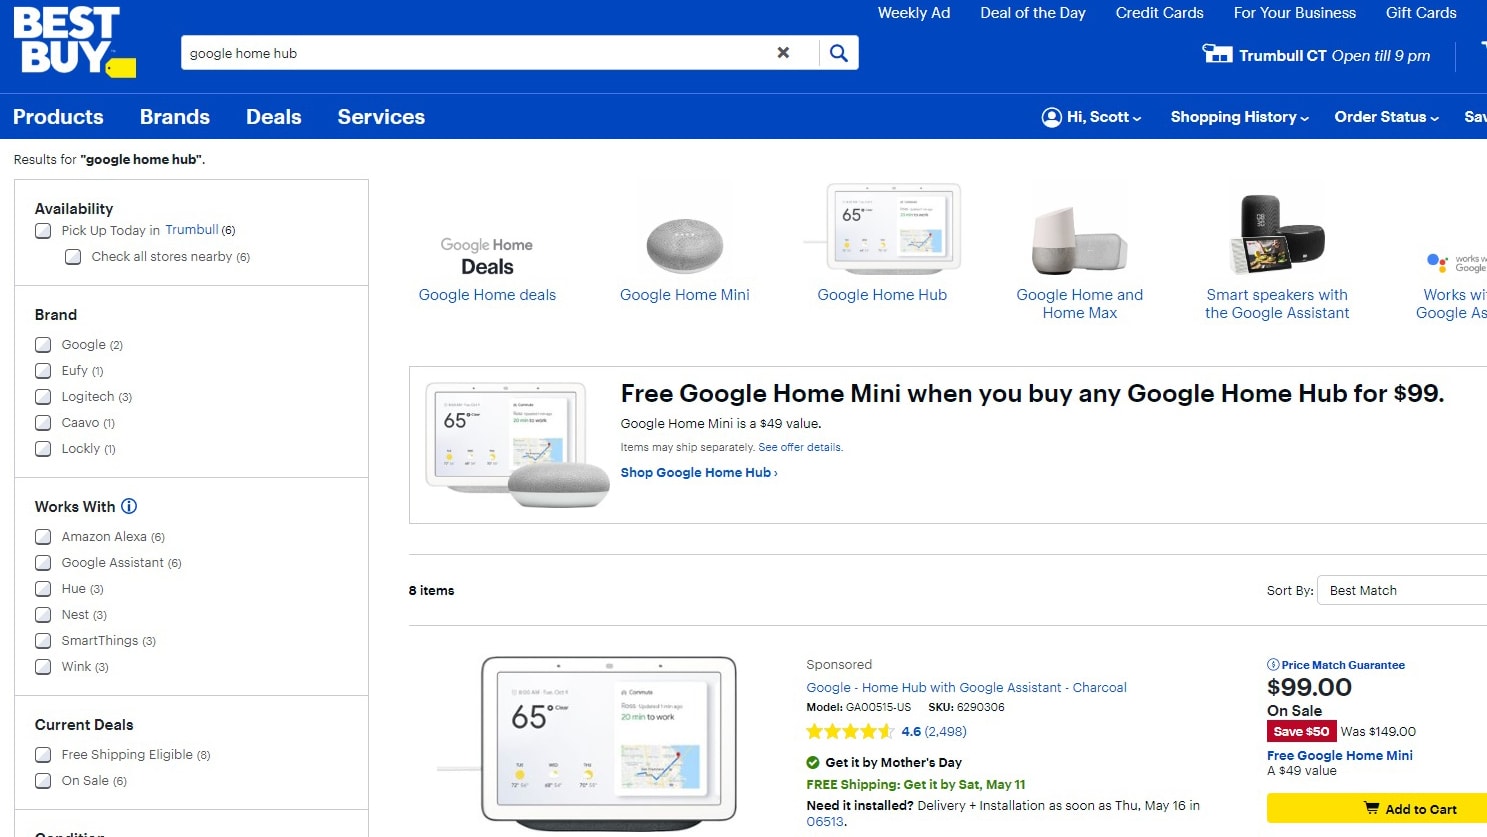 A deal for a Google Home Hub that also earns you a free Google Home Mini at Best Buy.